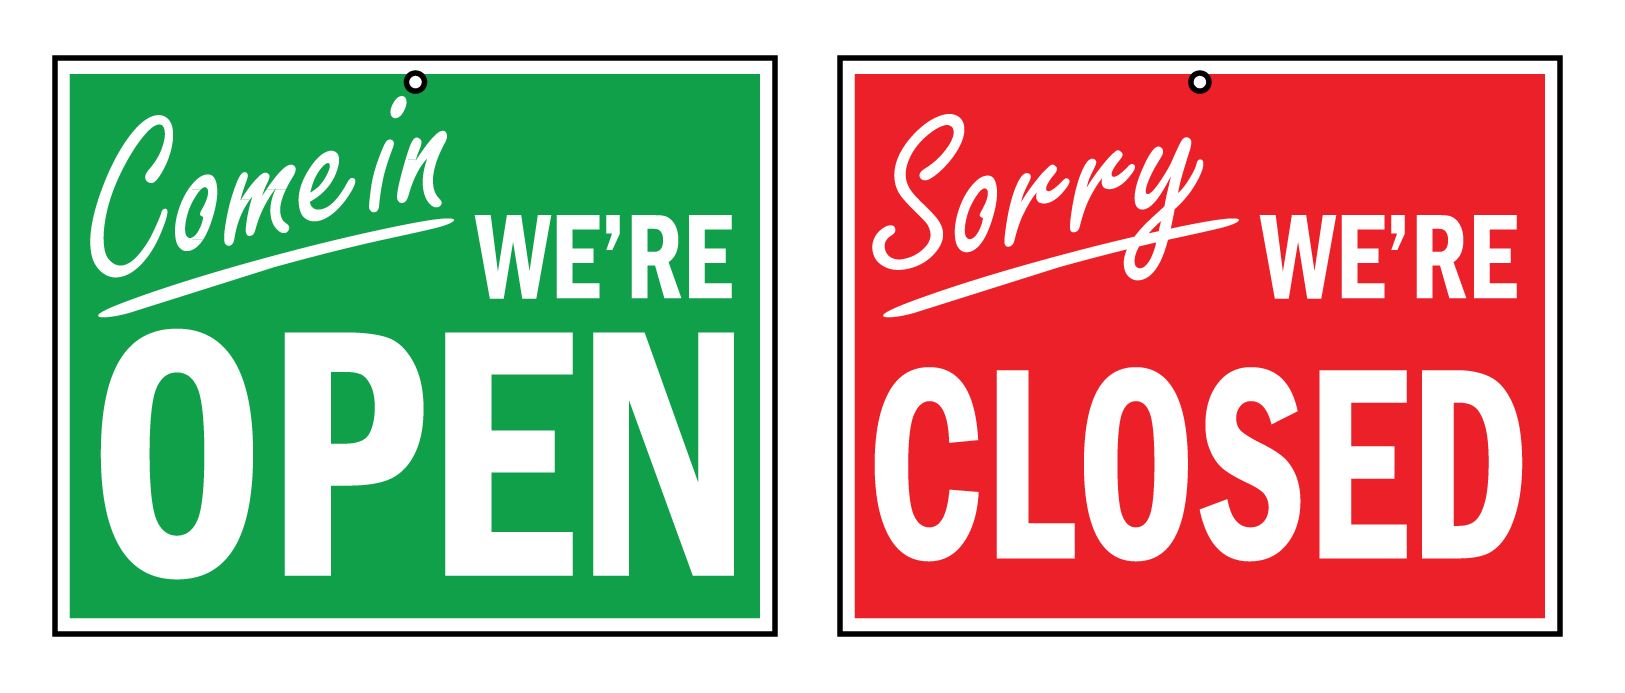 open-closed-sign-printable-printable-world-holiday